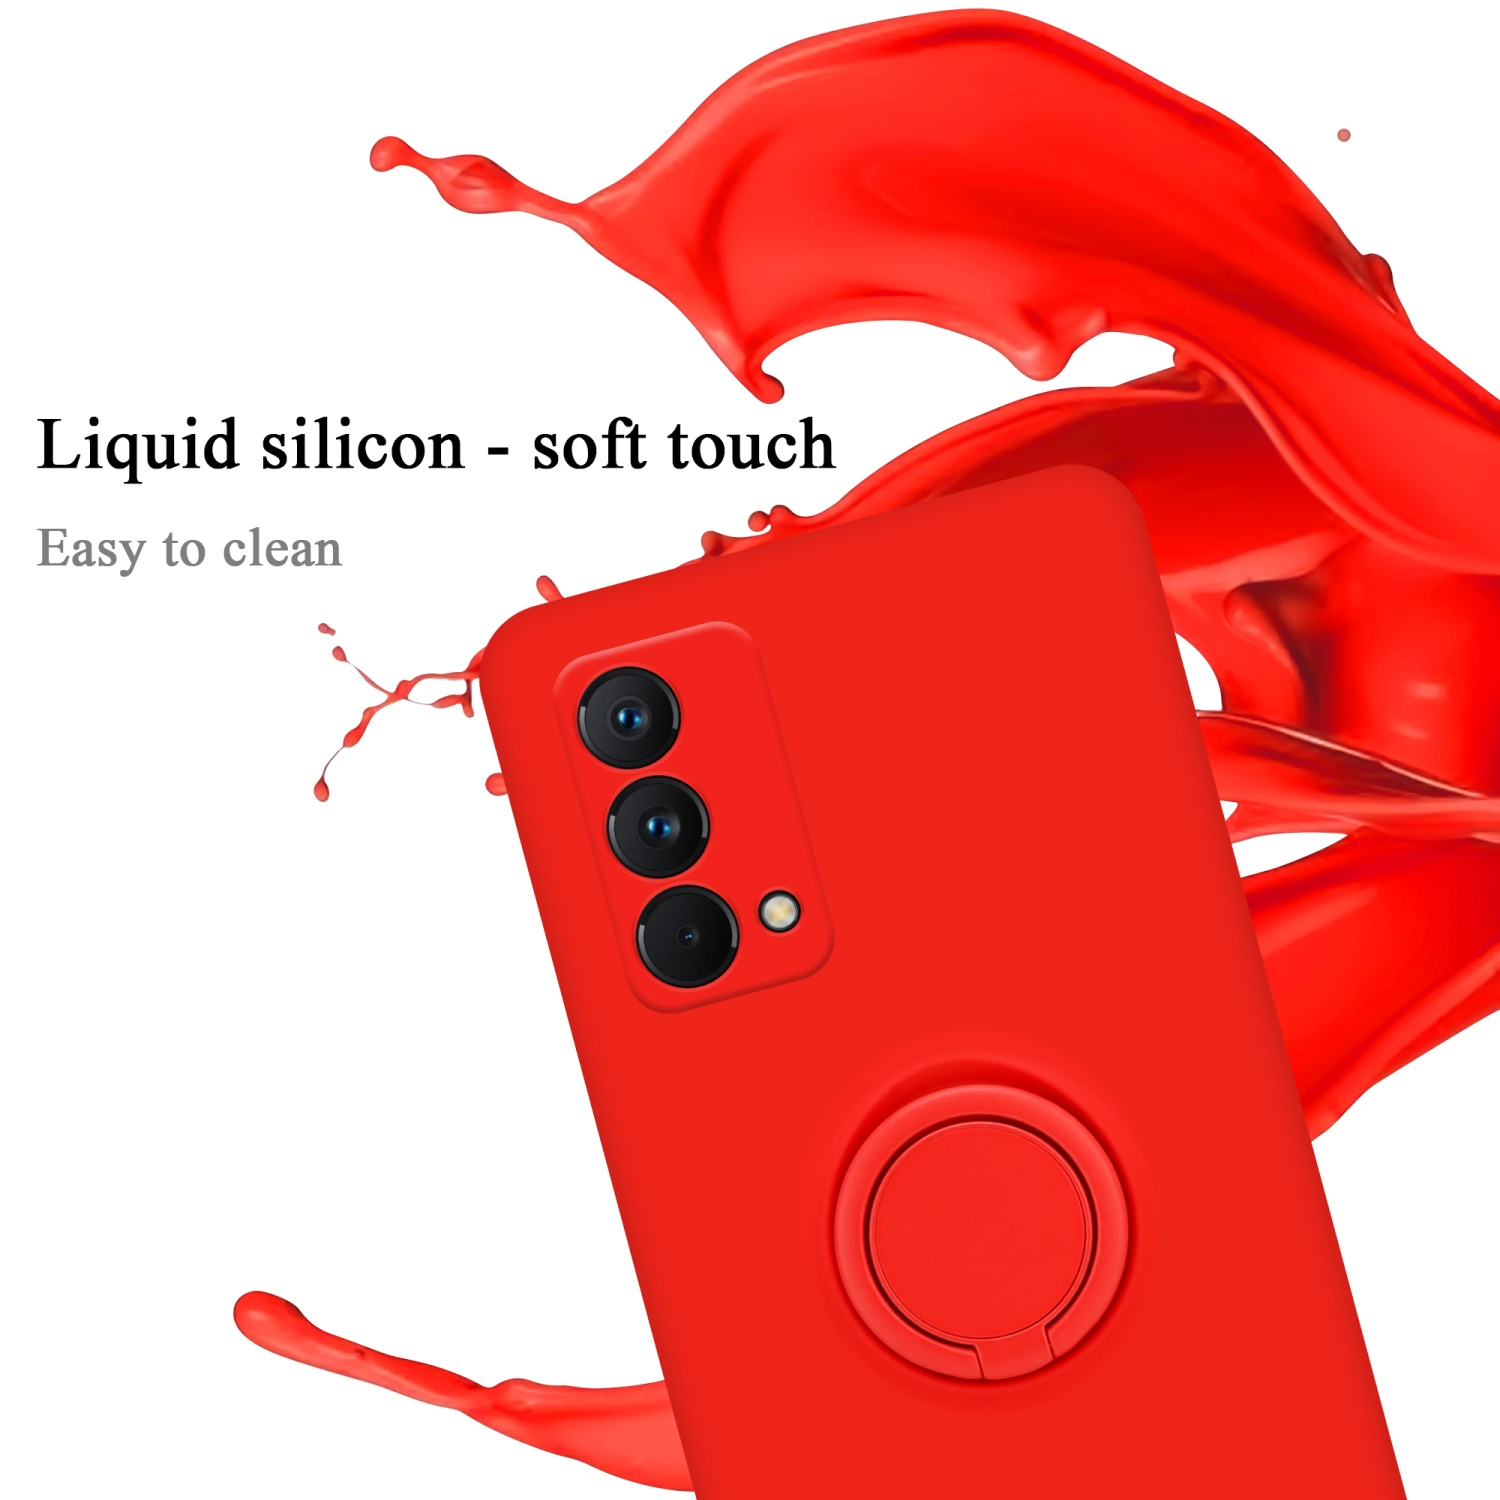 Hülle im Liquid Style, Ring Realme, GT ROT Silicone Backcover, LIQUID Master, CADORABO Case